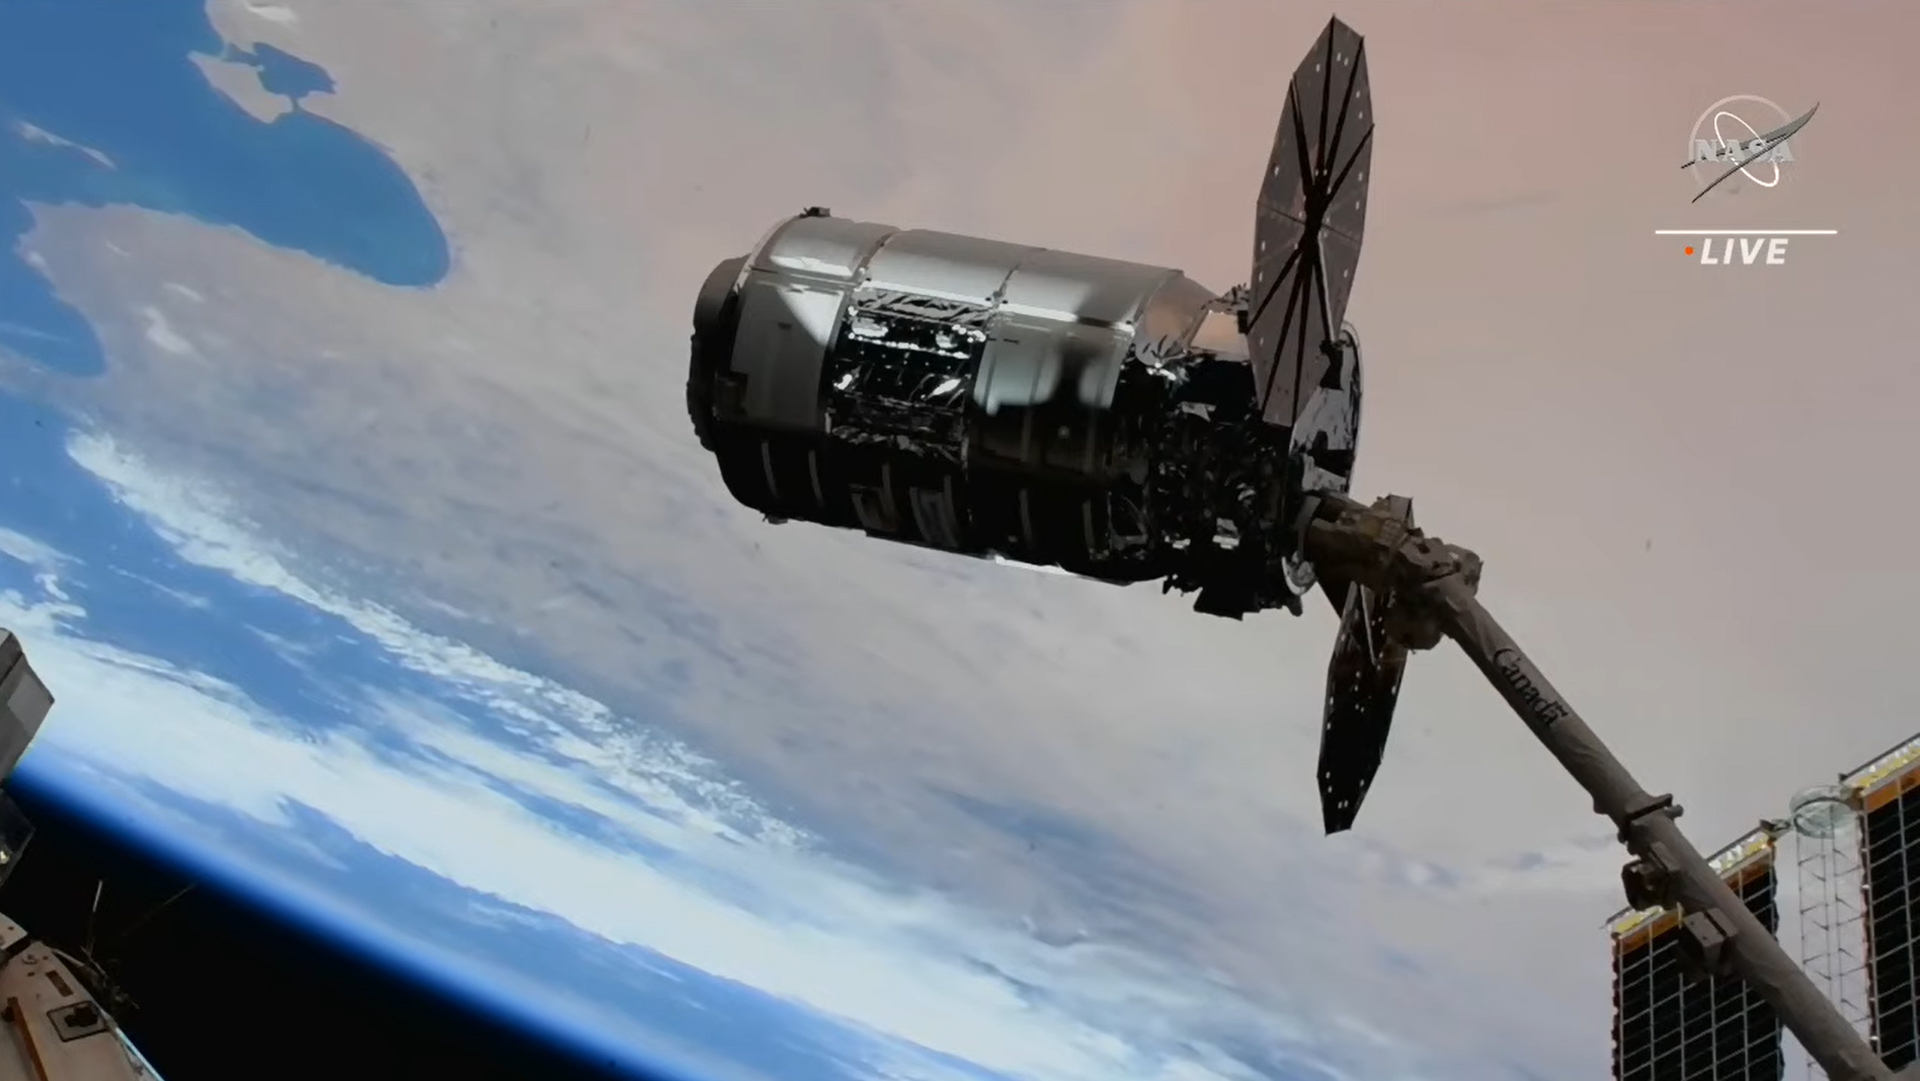 The Cygnus NG-19 Laurel Clark space freighter captured by the space station's robotic arm.